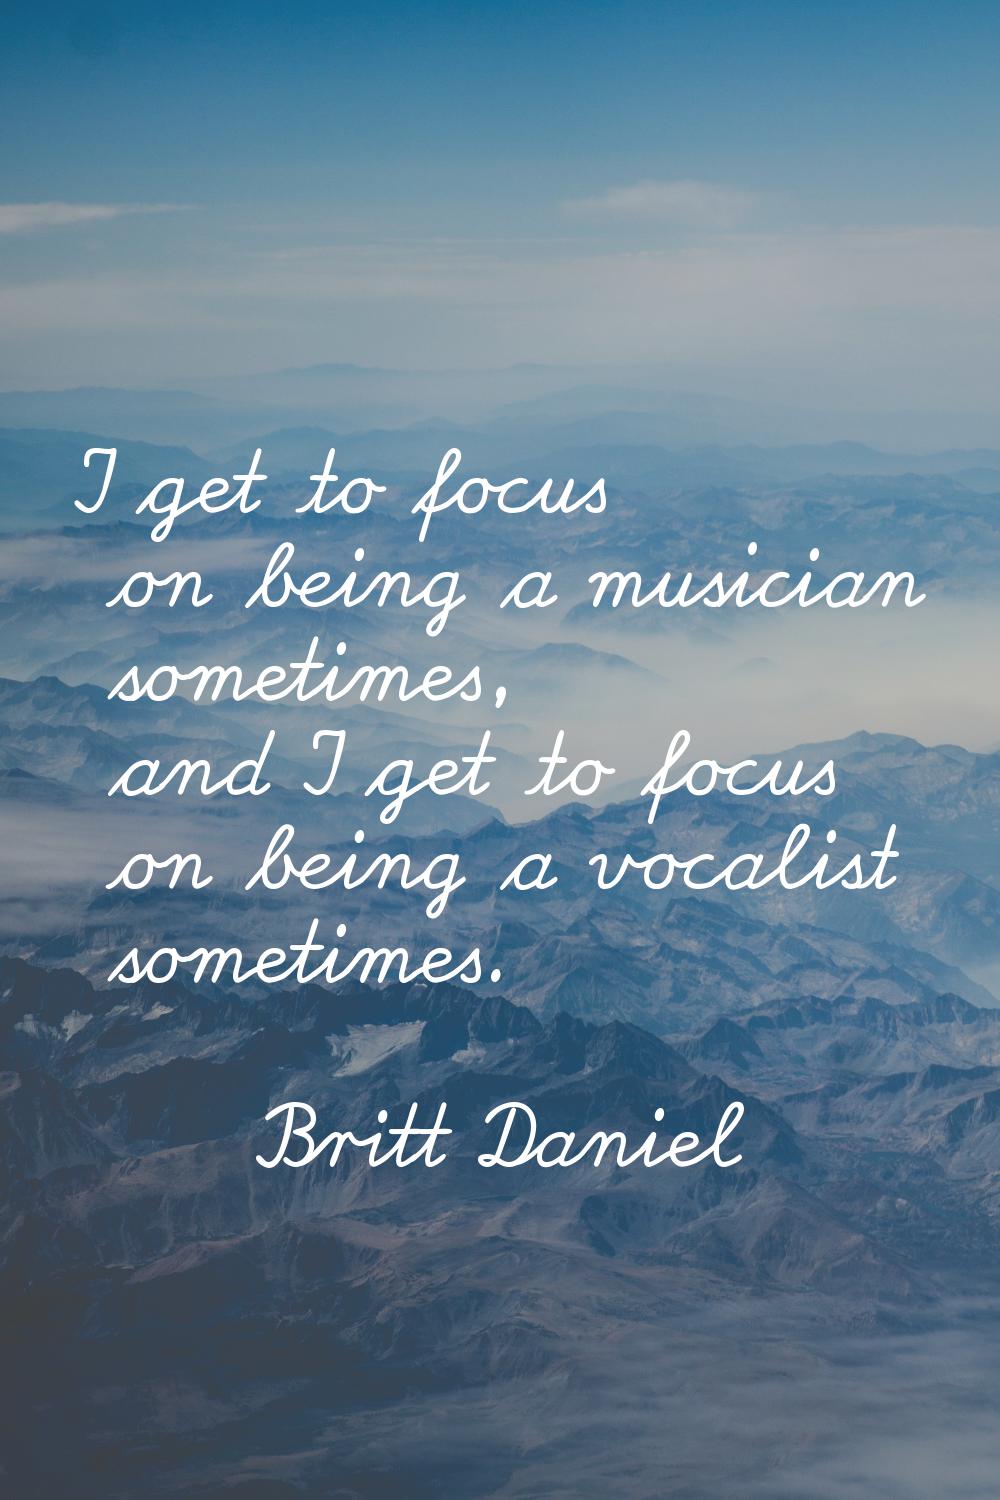 I get to focus on being a musician sometimes, and I get to focus on being a vocalist sometimes.